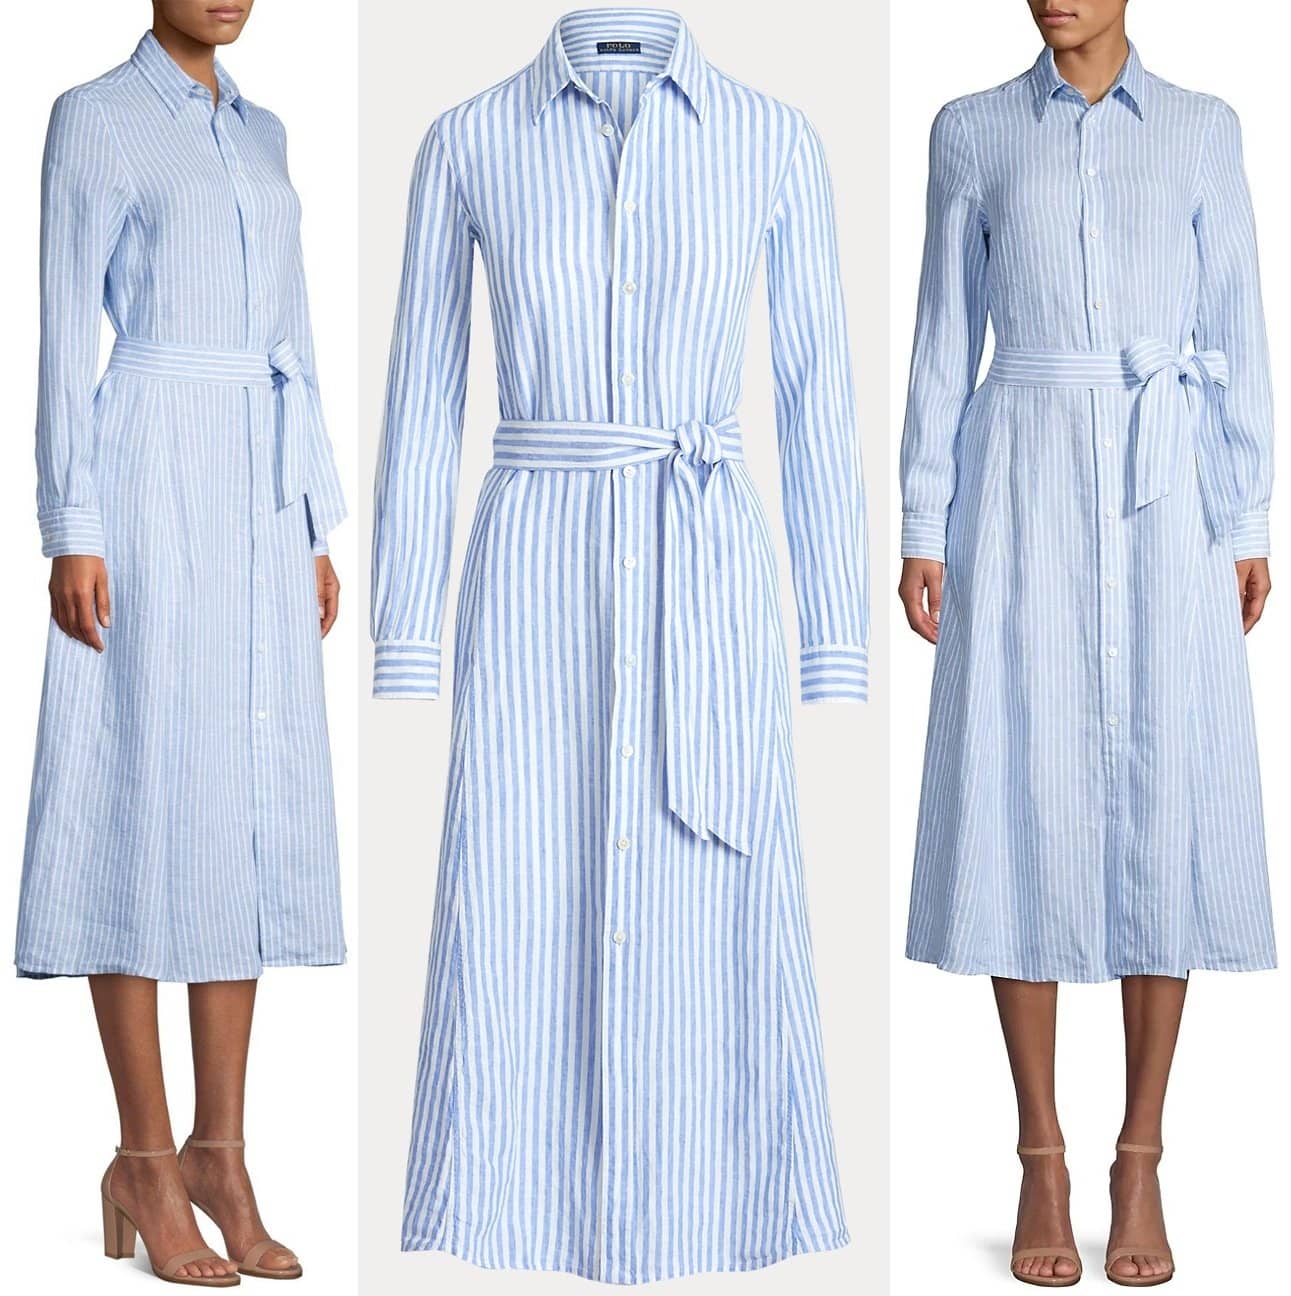 Lightweight linen brings ease of movement to this striped shirtdress, which features a fluid A-line skirt and is accented with a self-belt at the waist